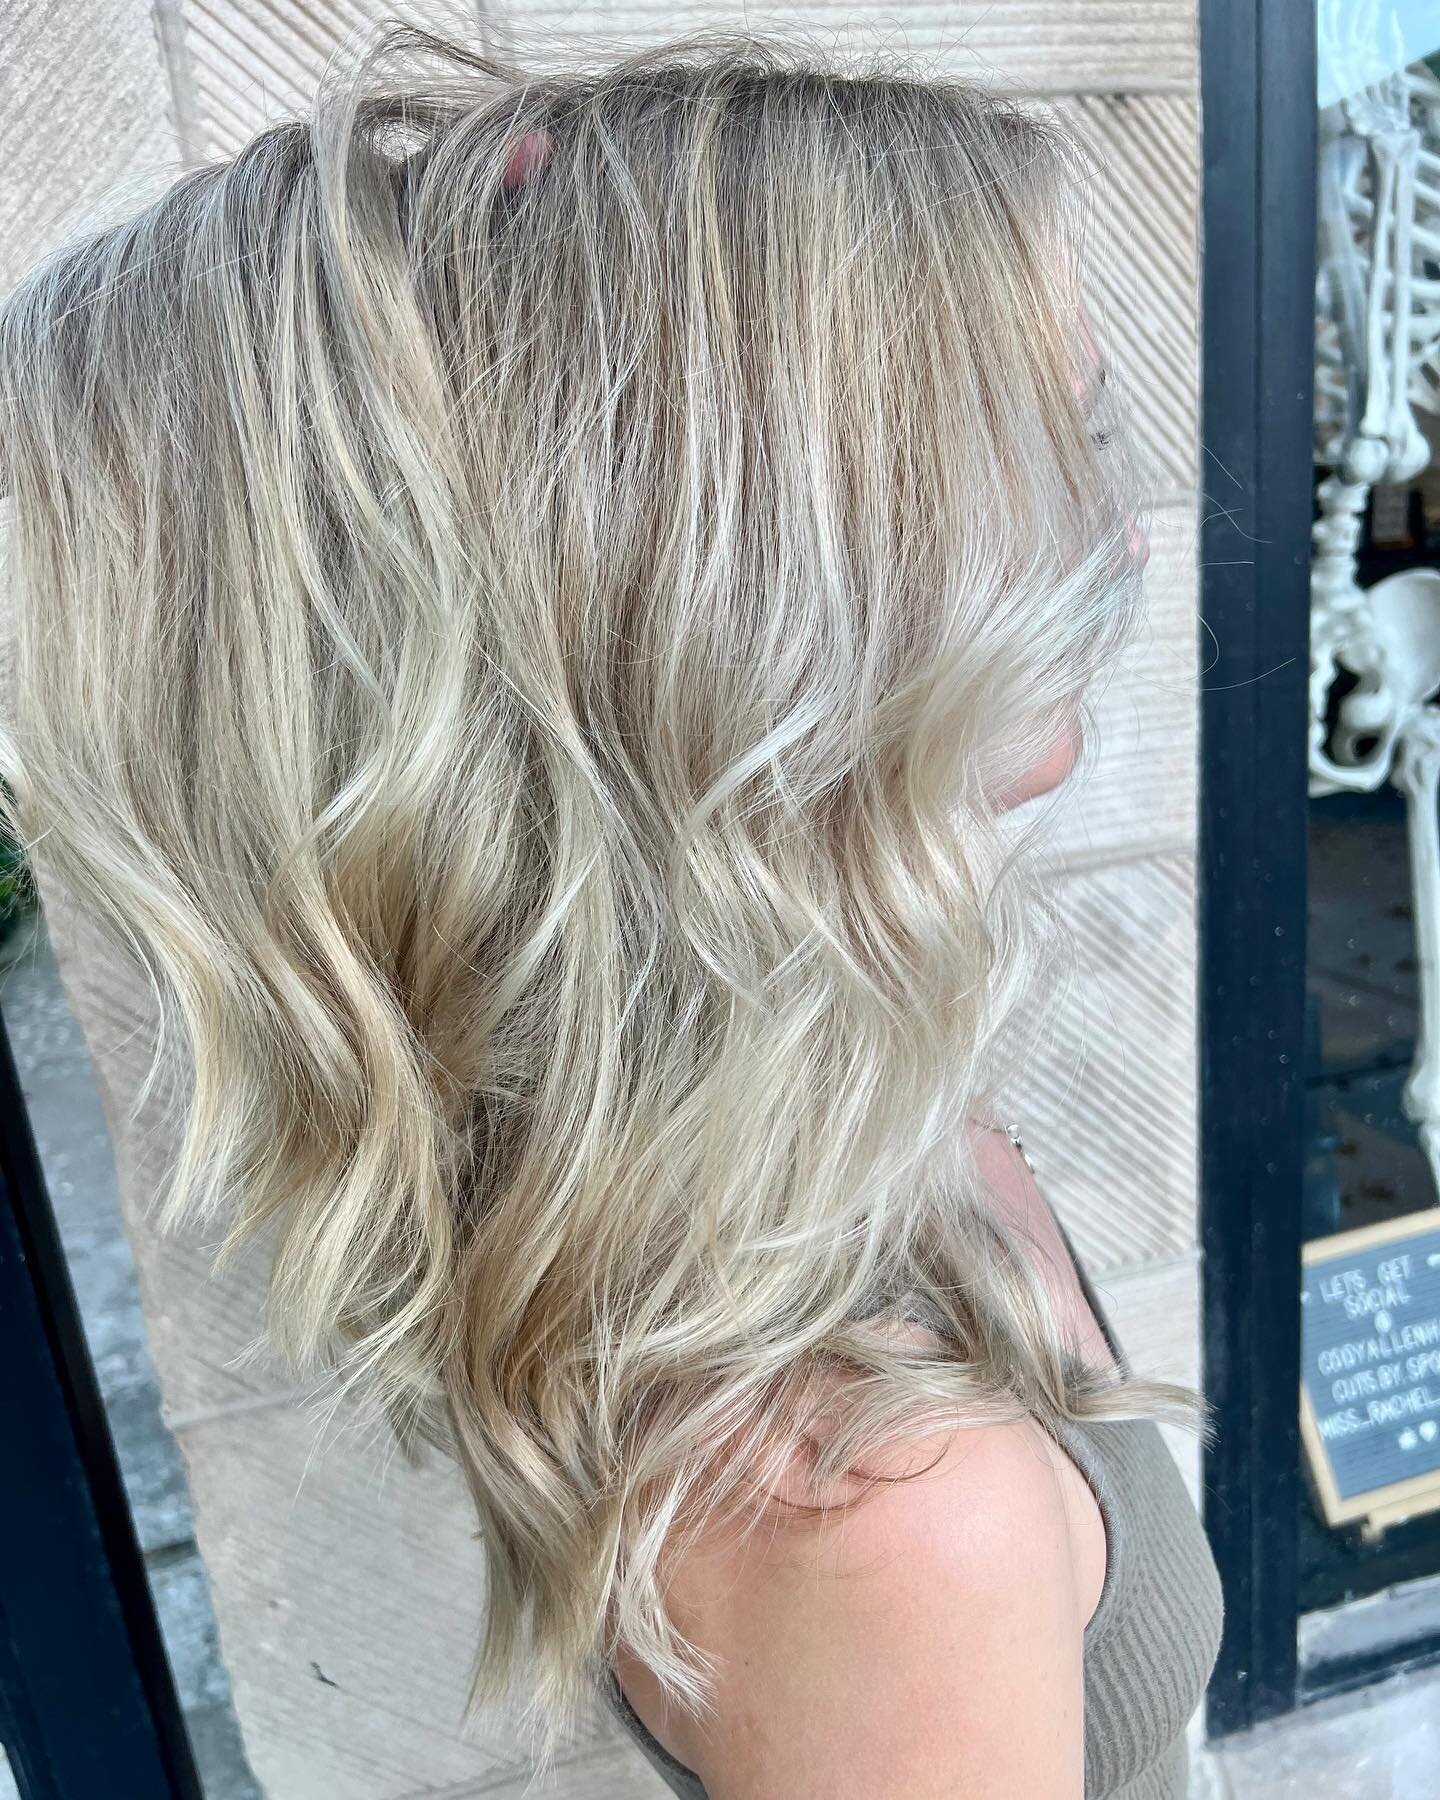 Dream Blonde by @cuts.by.spooky 
Swipe through to see before and after!💛 #hair #hairstylist #bleach #dreamblonde #blonde #bleachedhair #touchup #color #haircolor #transformation #fun #blondemoment